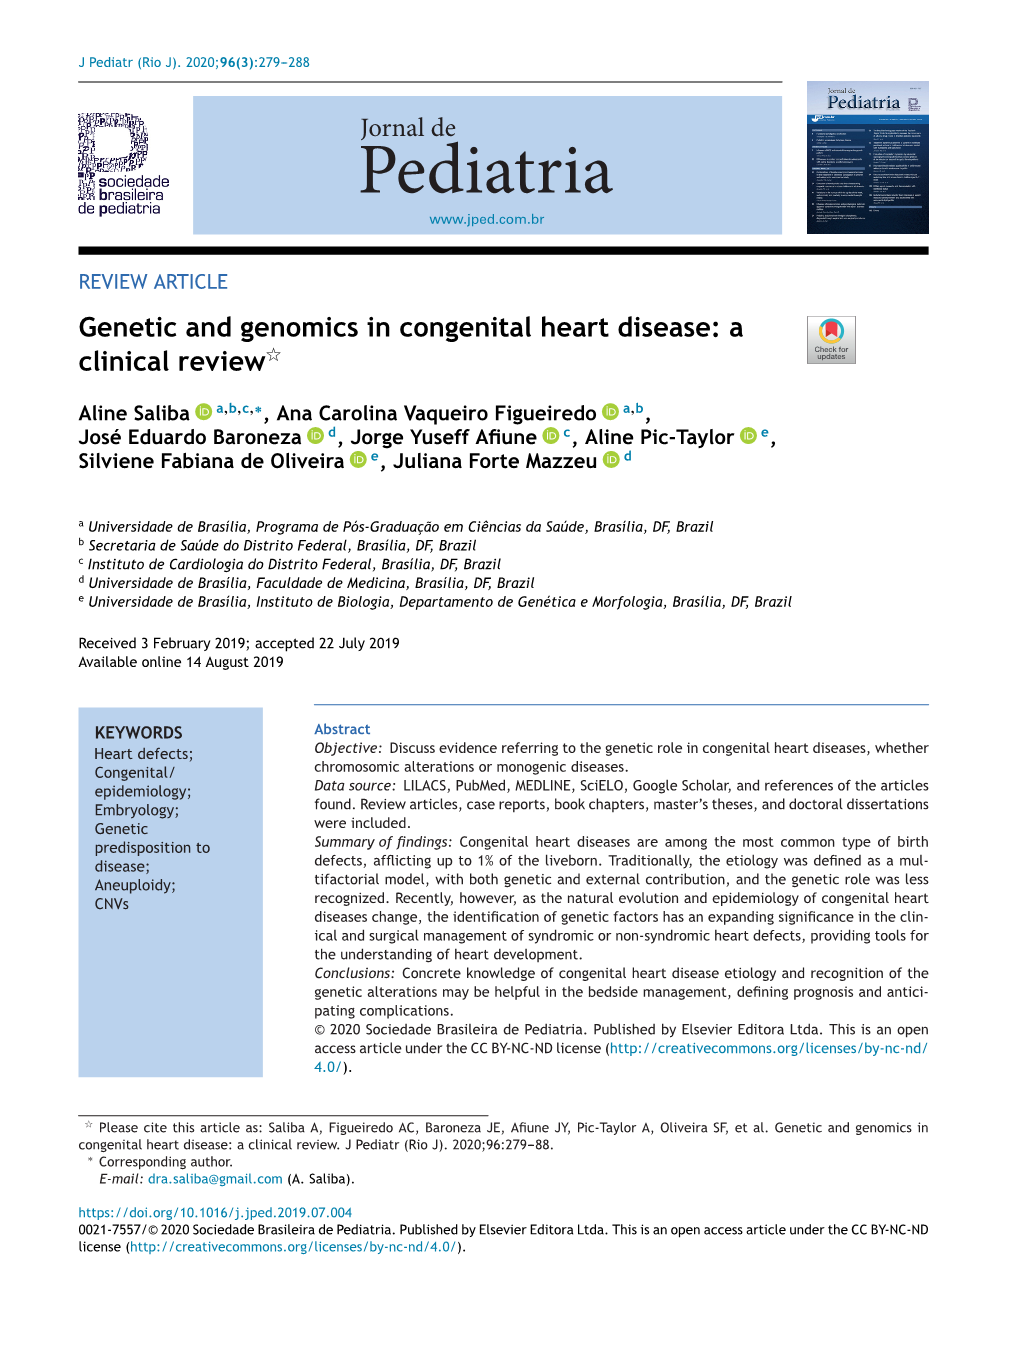 Genetic and Genomics in Congenital Heart Disease: a ଝ Clinical Review